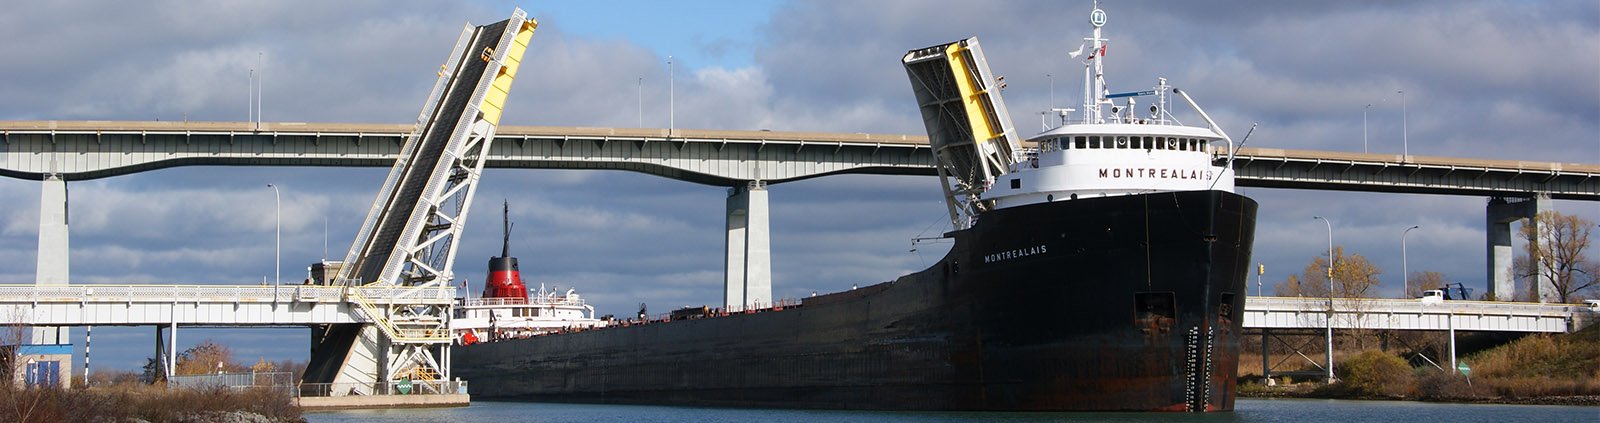 The ship Montrealis travels south on the Welland Canal under the open Homer Bridge.